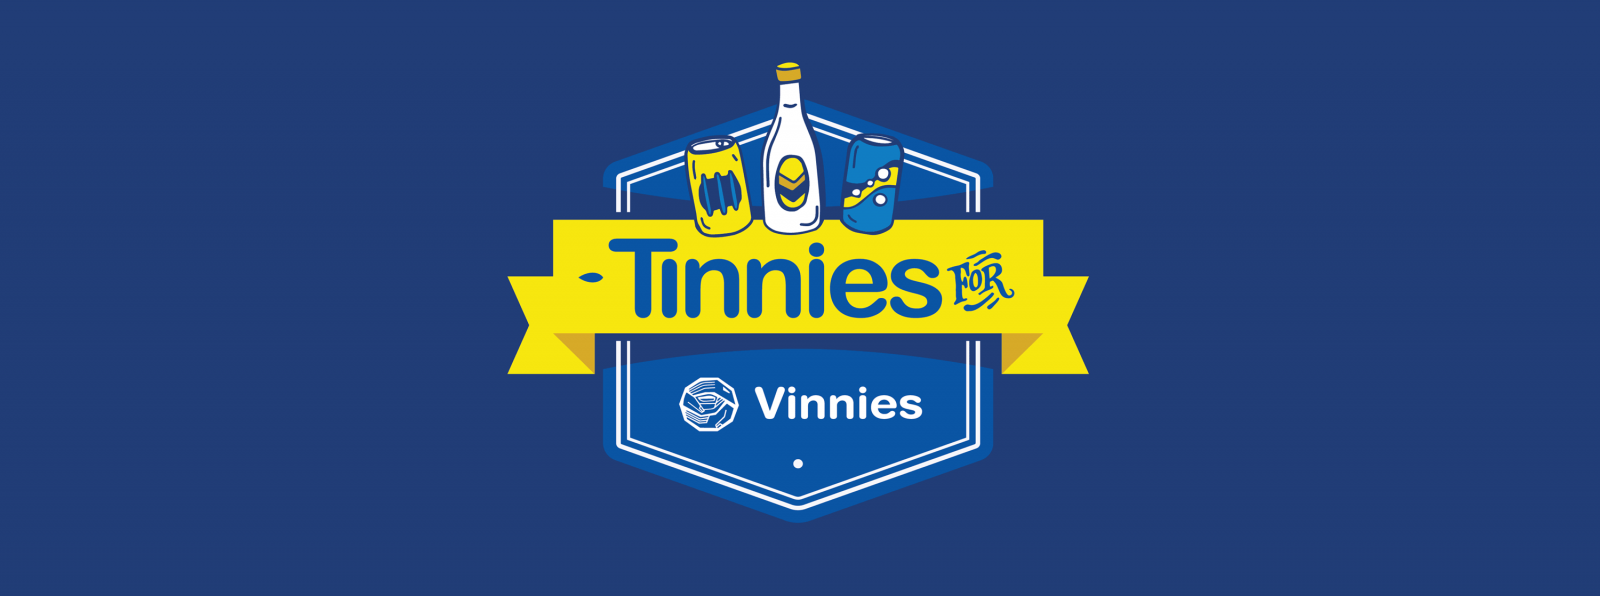 Tinnies for Vinnies PNG SML logo 3000X3000